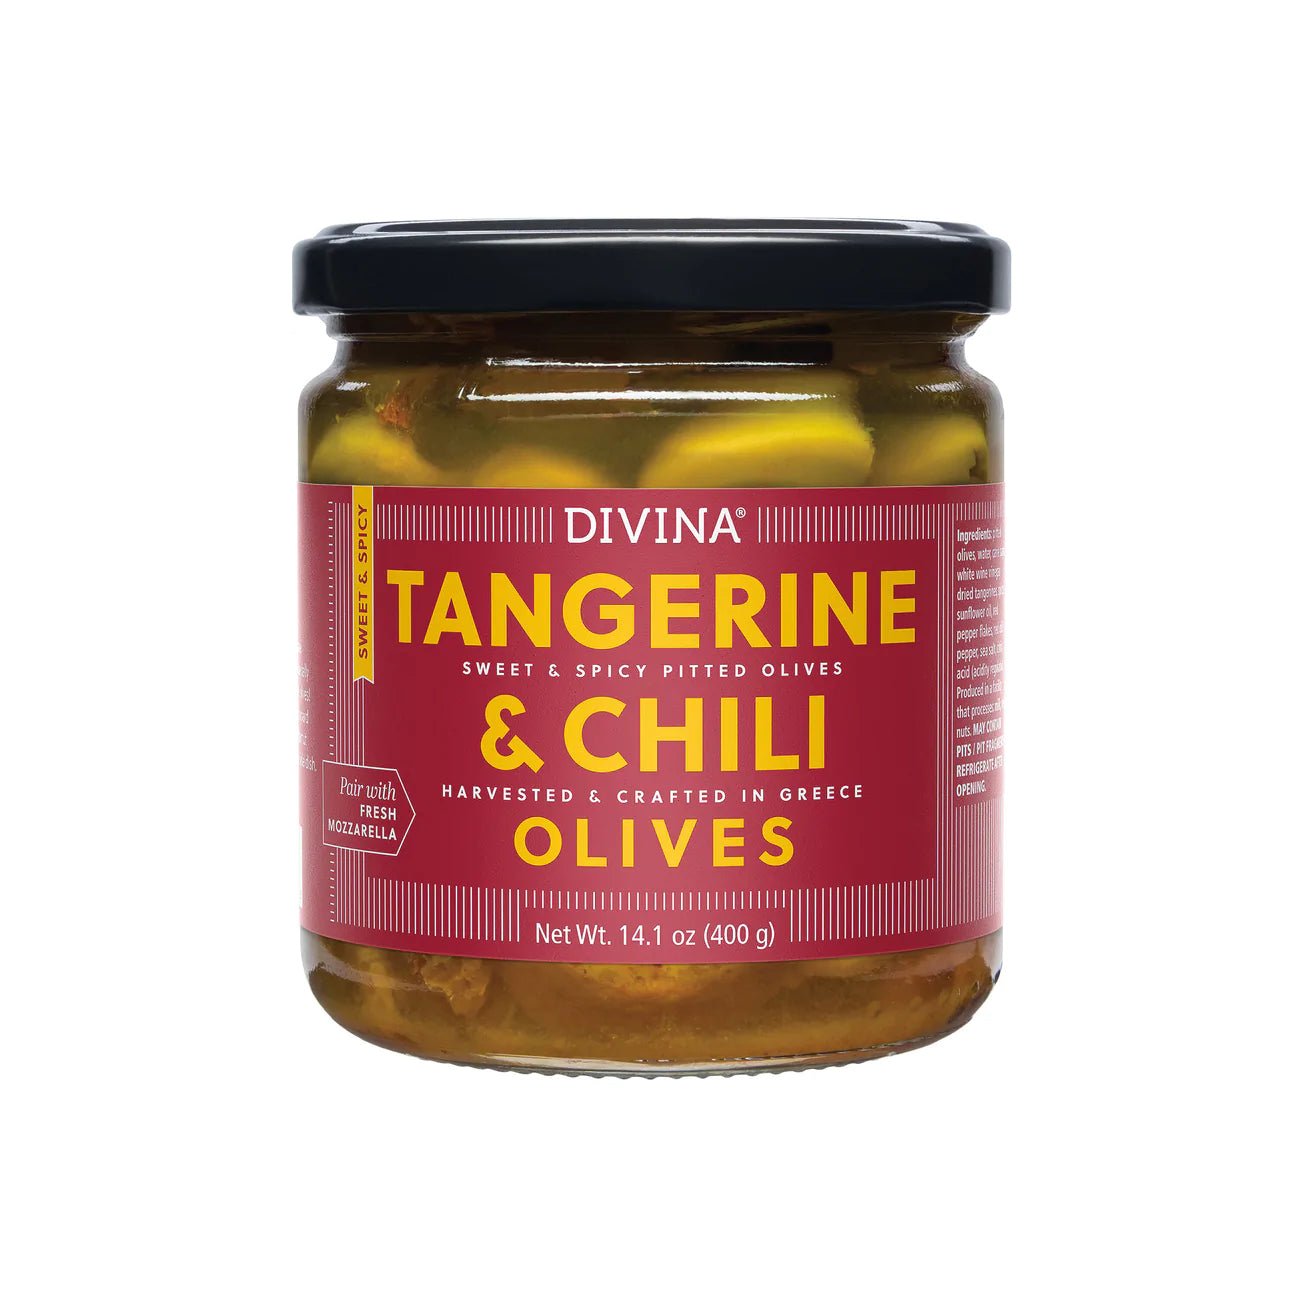 Tangerine and Chili Sweet and Spicy Olives, Divina, 14.1 oz